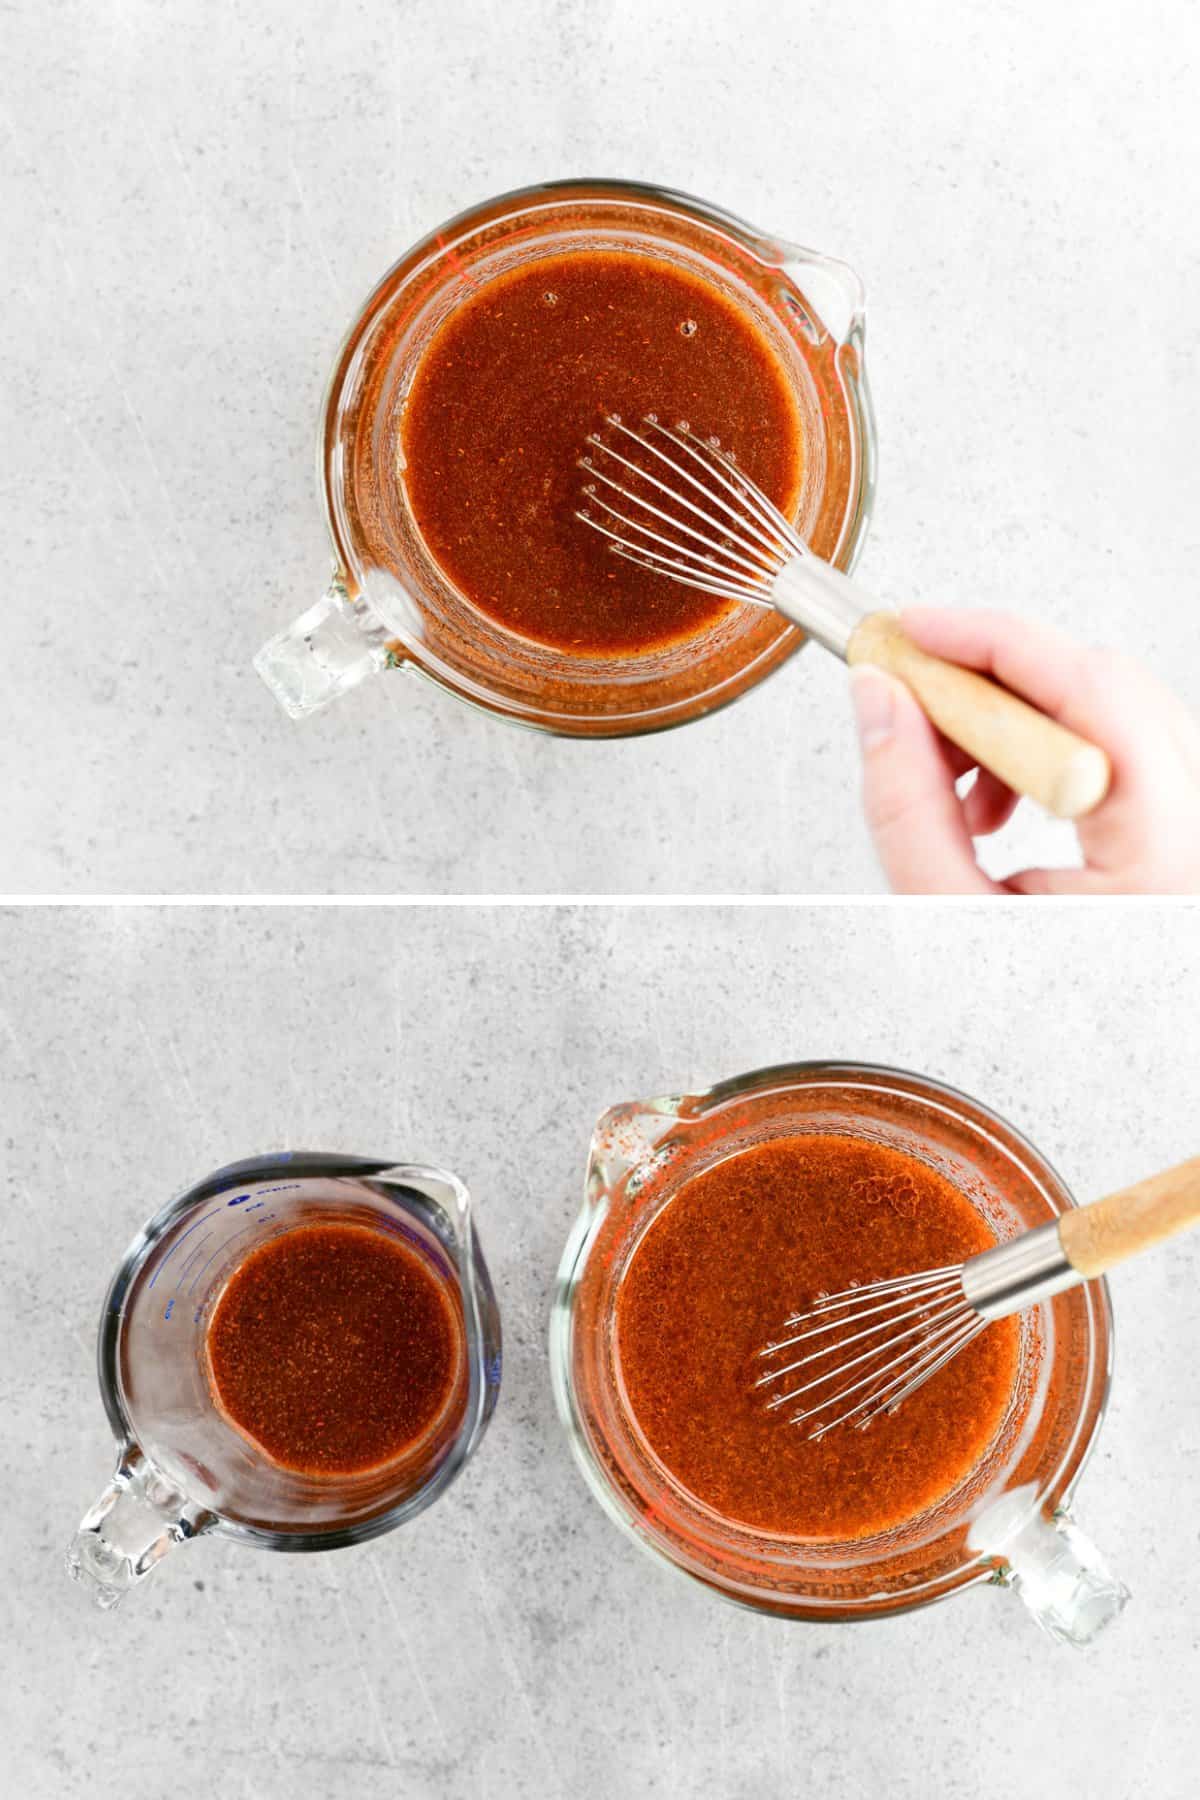 Whisking marinade in a glass bowl.